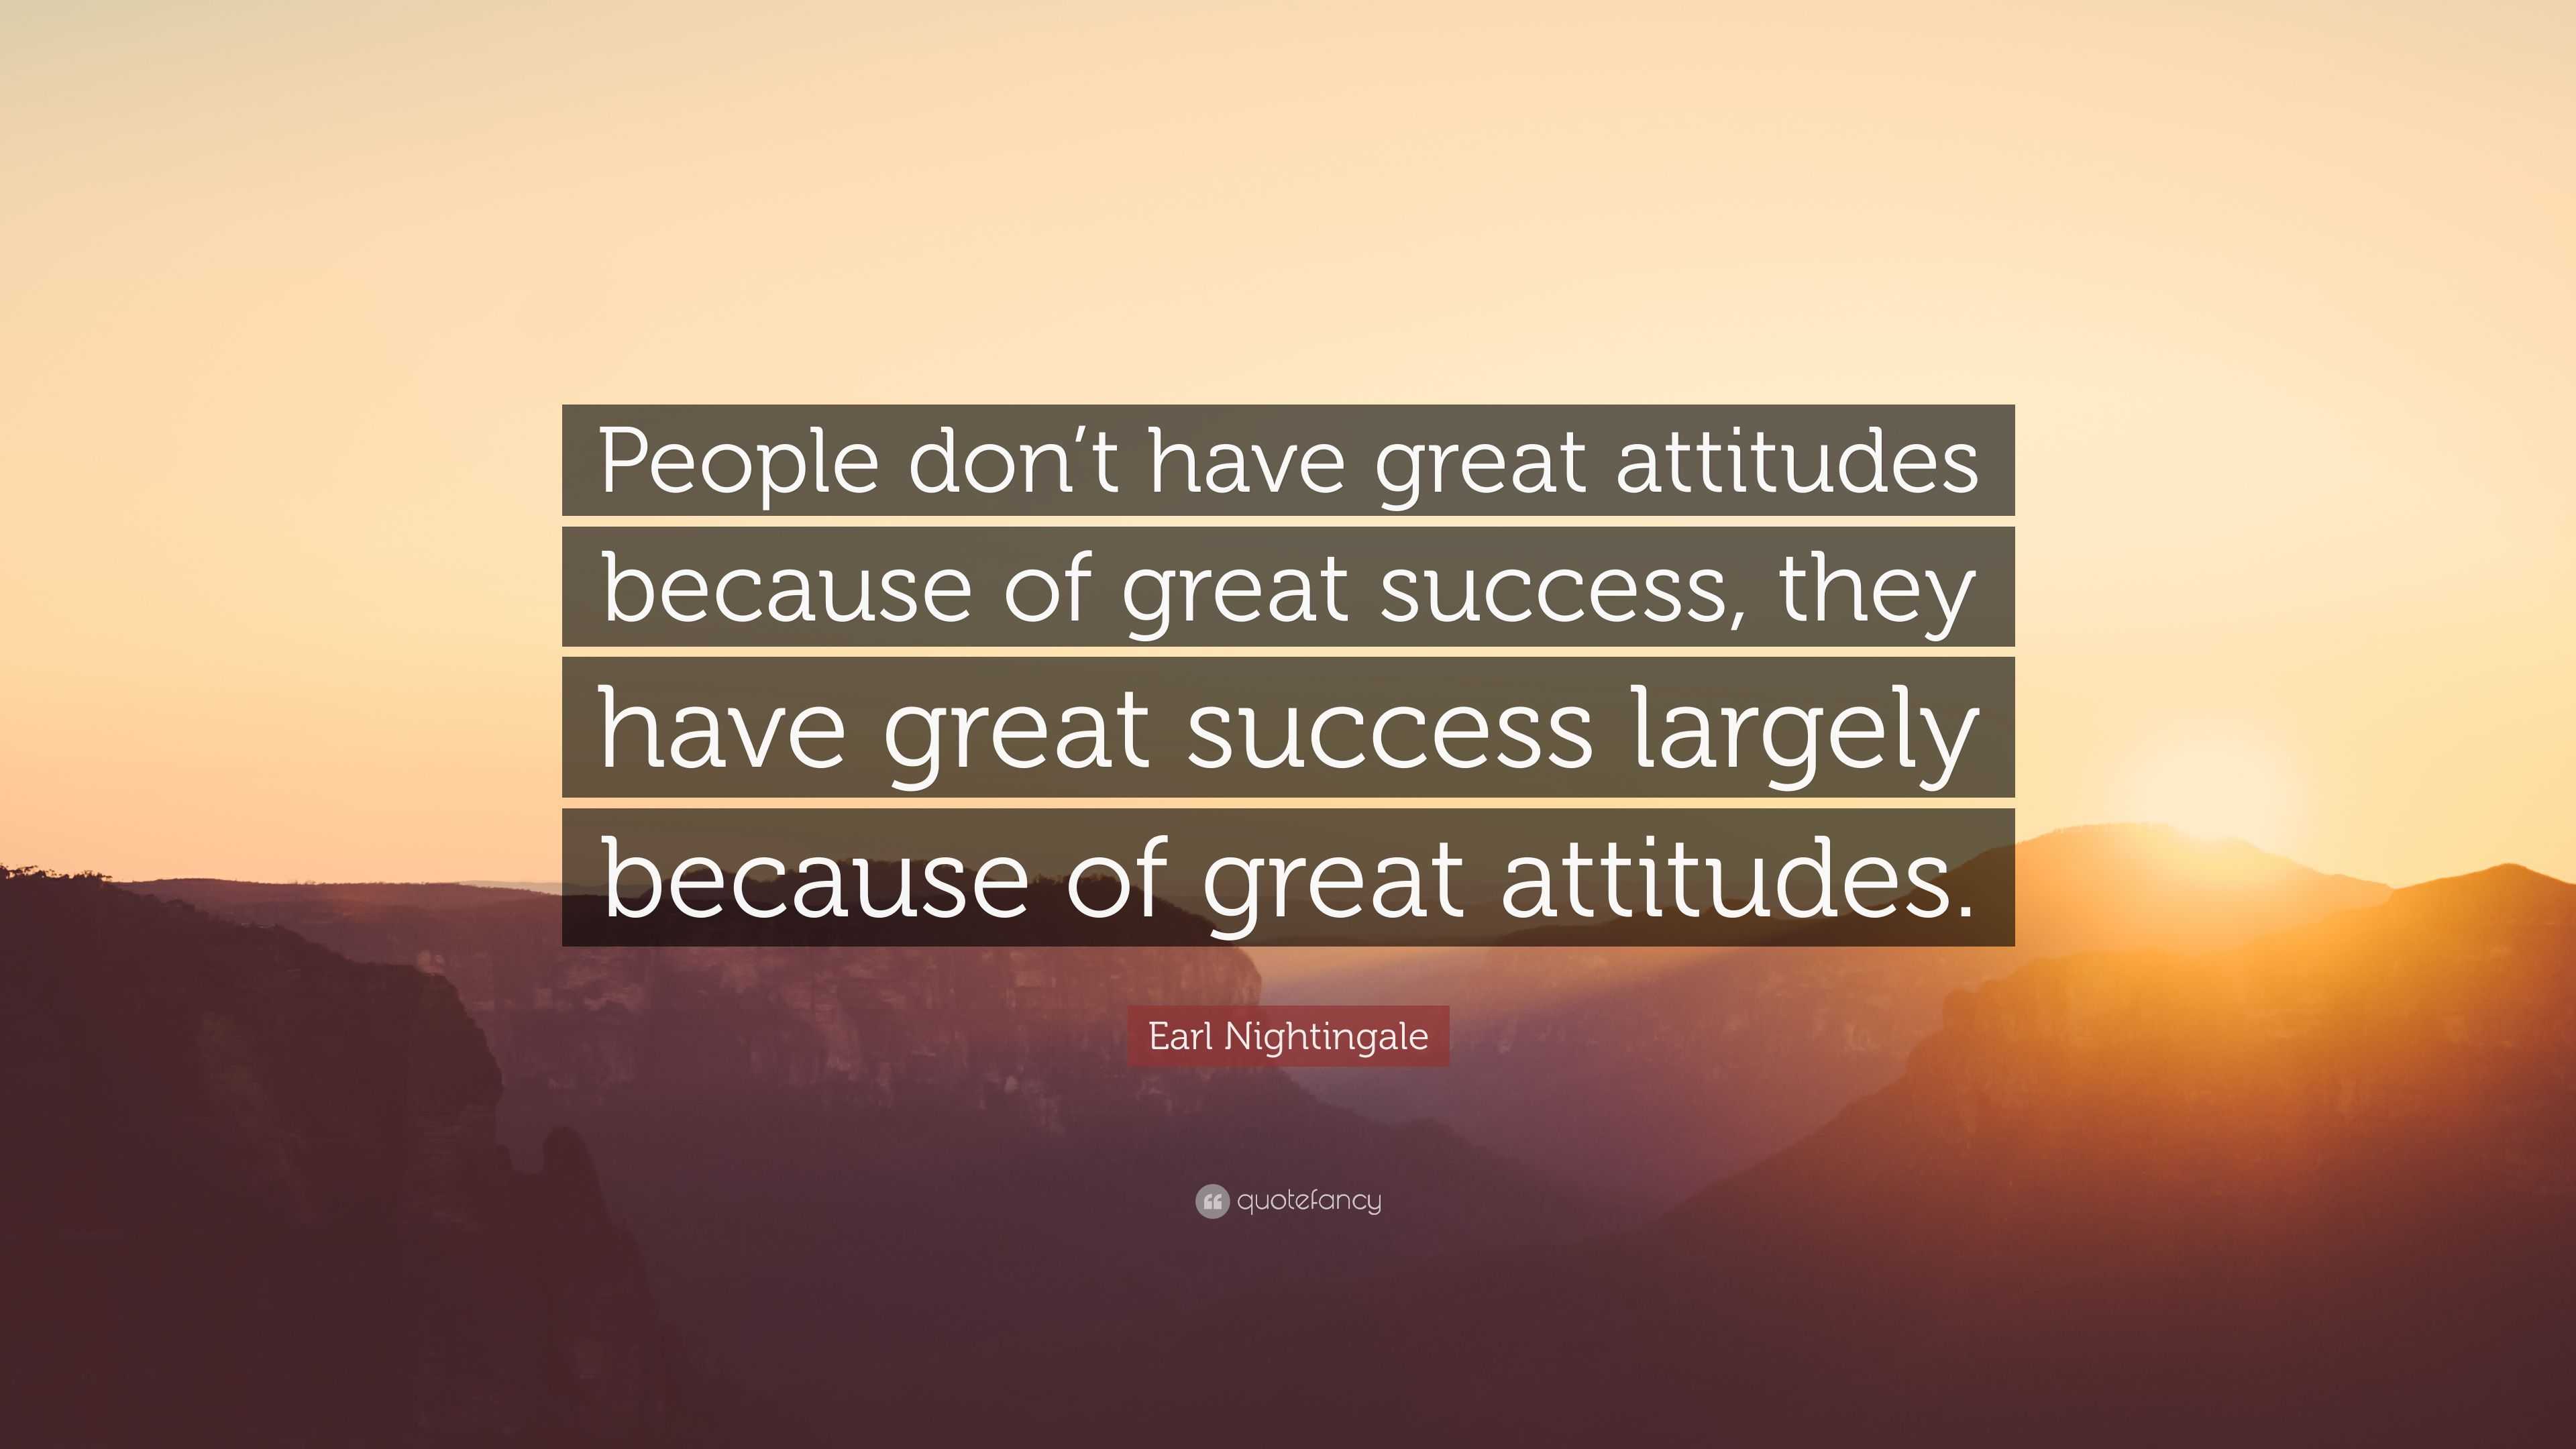 Earl Nightingale Quote: “People don’t have great attitudes because of ...